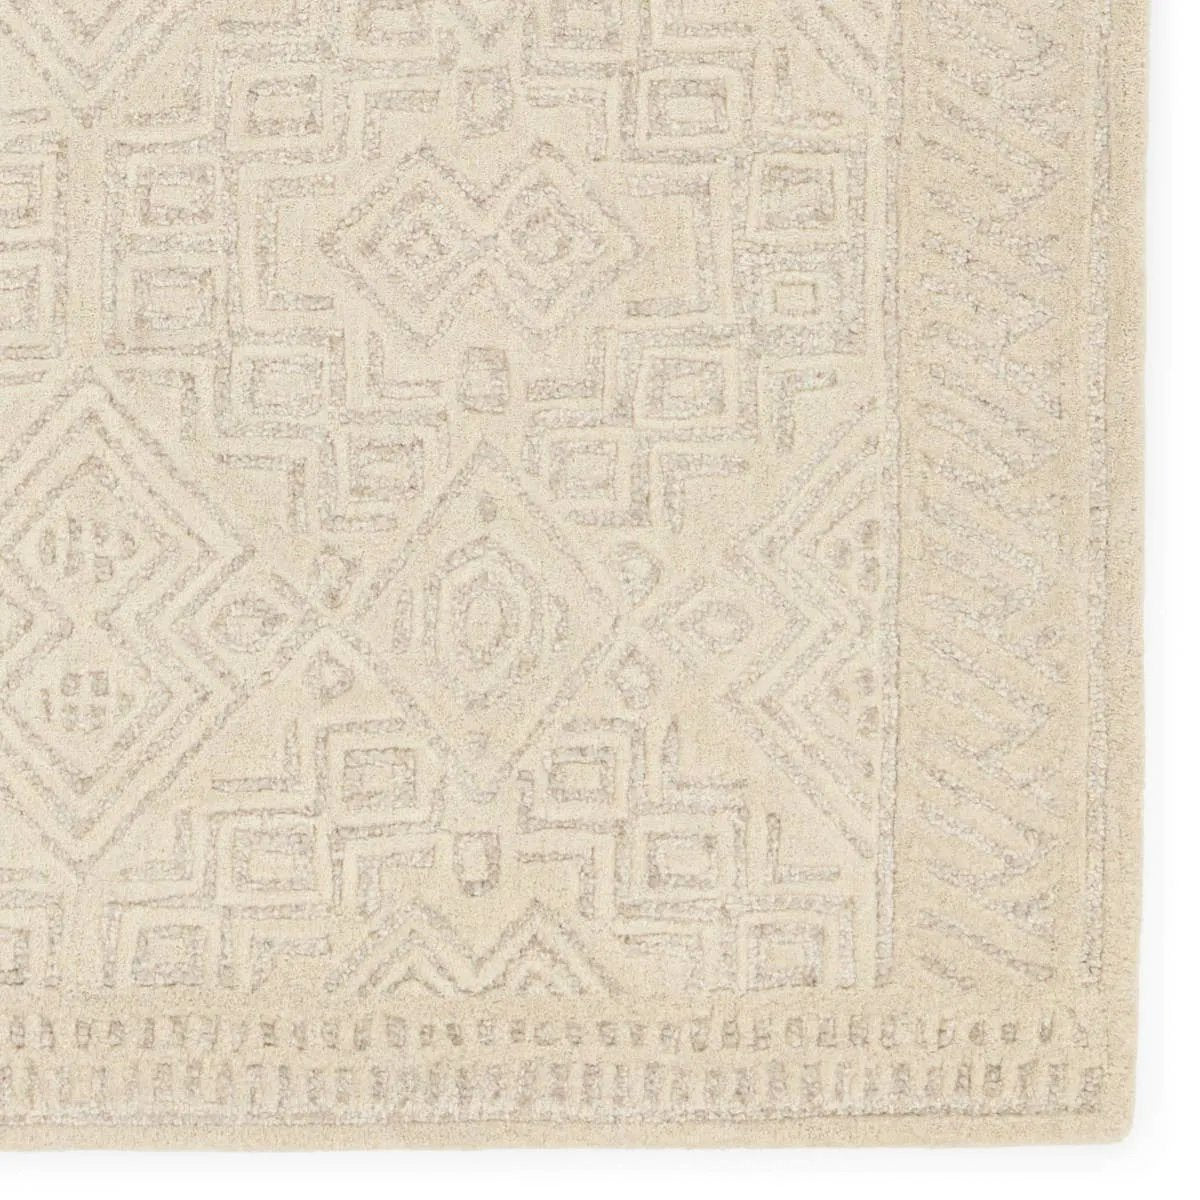 The Farryn Eccos boasts masterfully hand-tufted designs with stunning detail and versatile colorways. The Silva rug features a tribal-inspired, intricate geometric design in warm hues of tan and light gray. This transitional design is crafted of durable wool and complements a variety of styles, from global to rustic decor. Amethyst Home provides interior design, new home construction design consulting, vintage area rugs, and lighting in the Washington metro area.